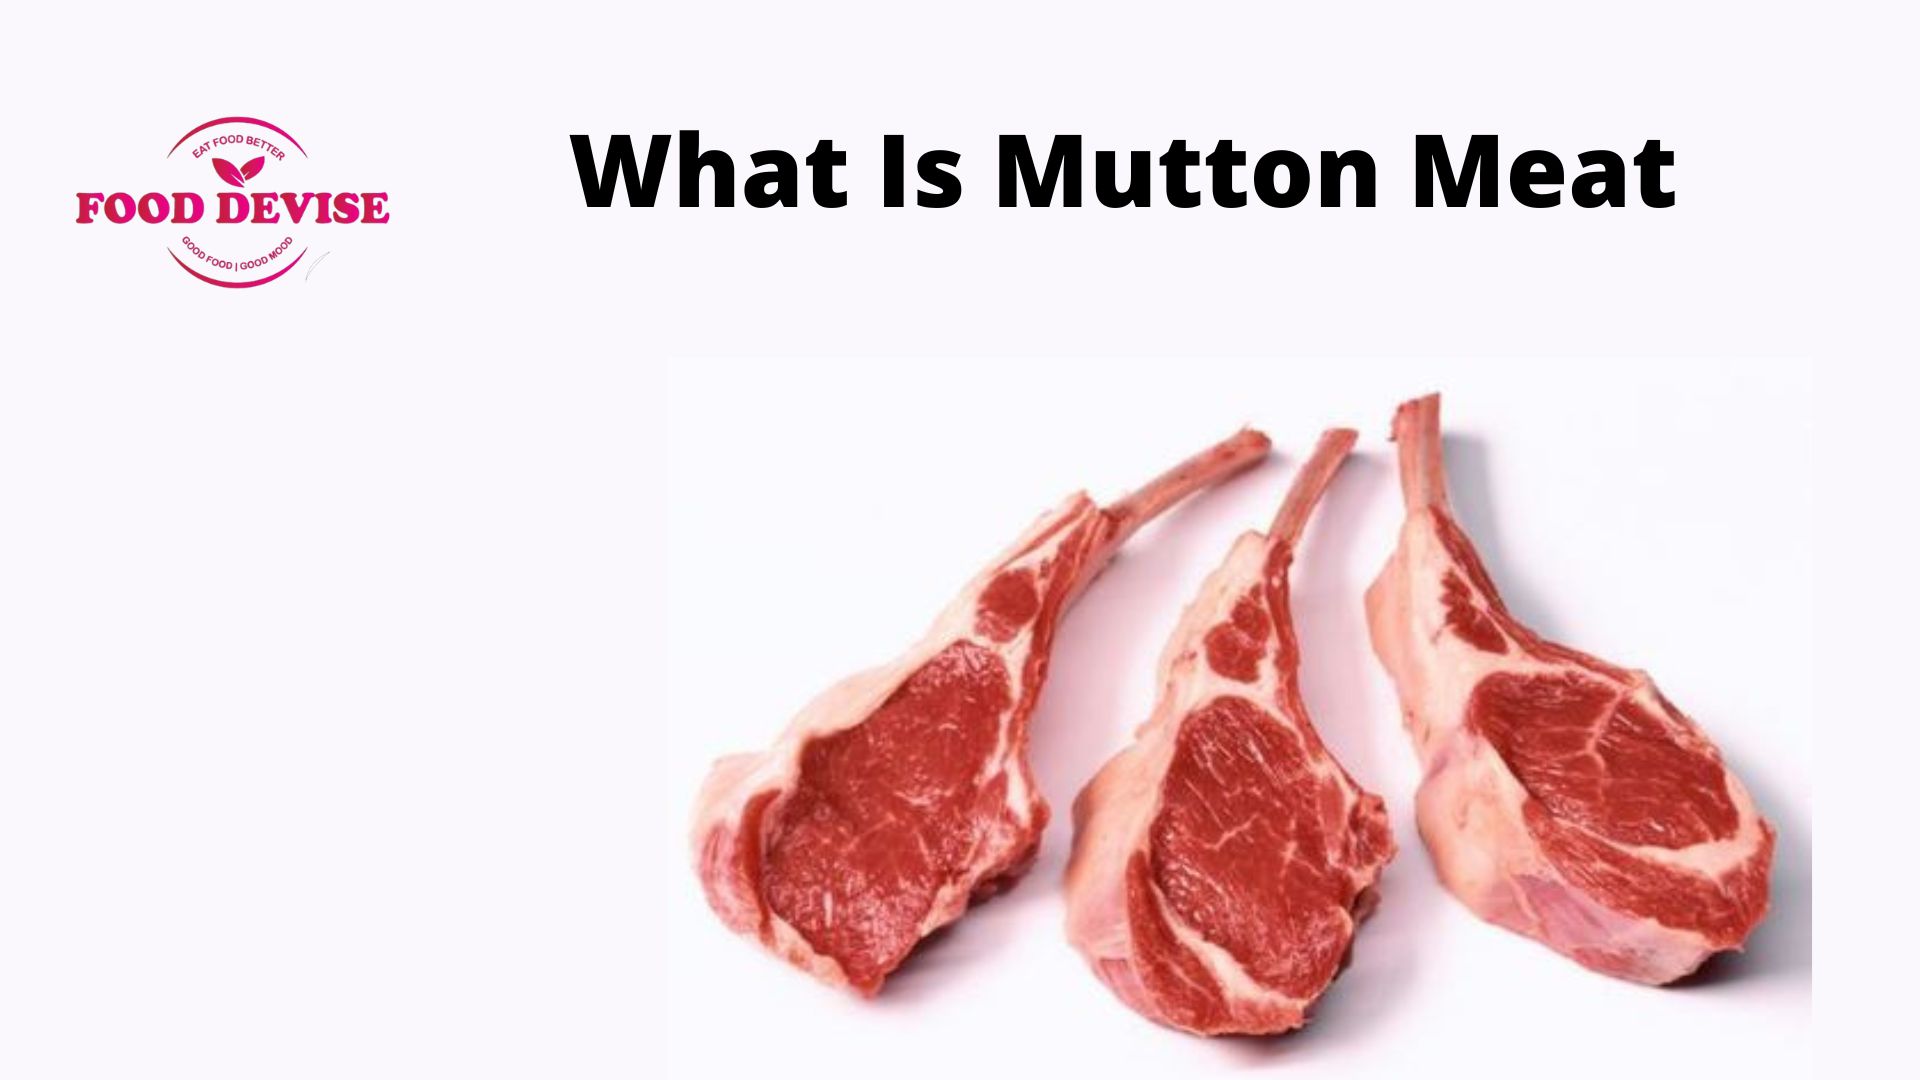 What is Mutton Meat